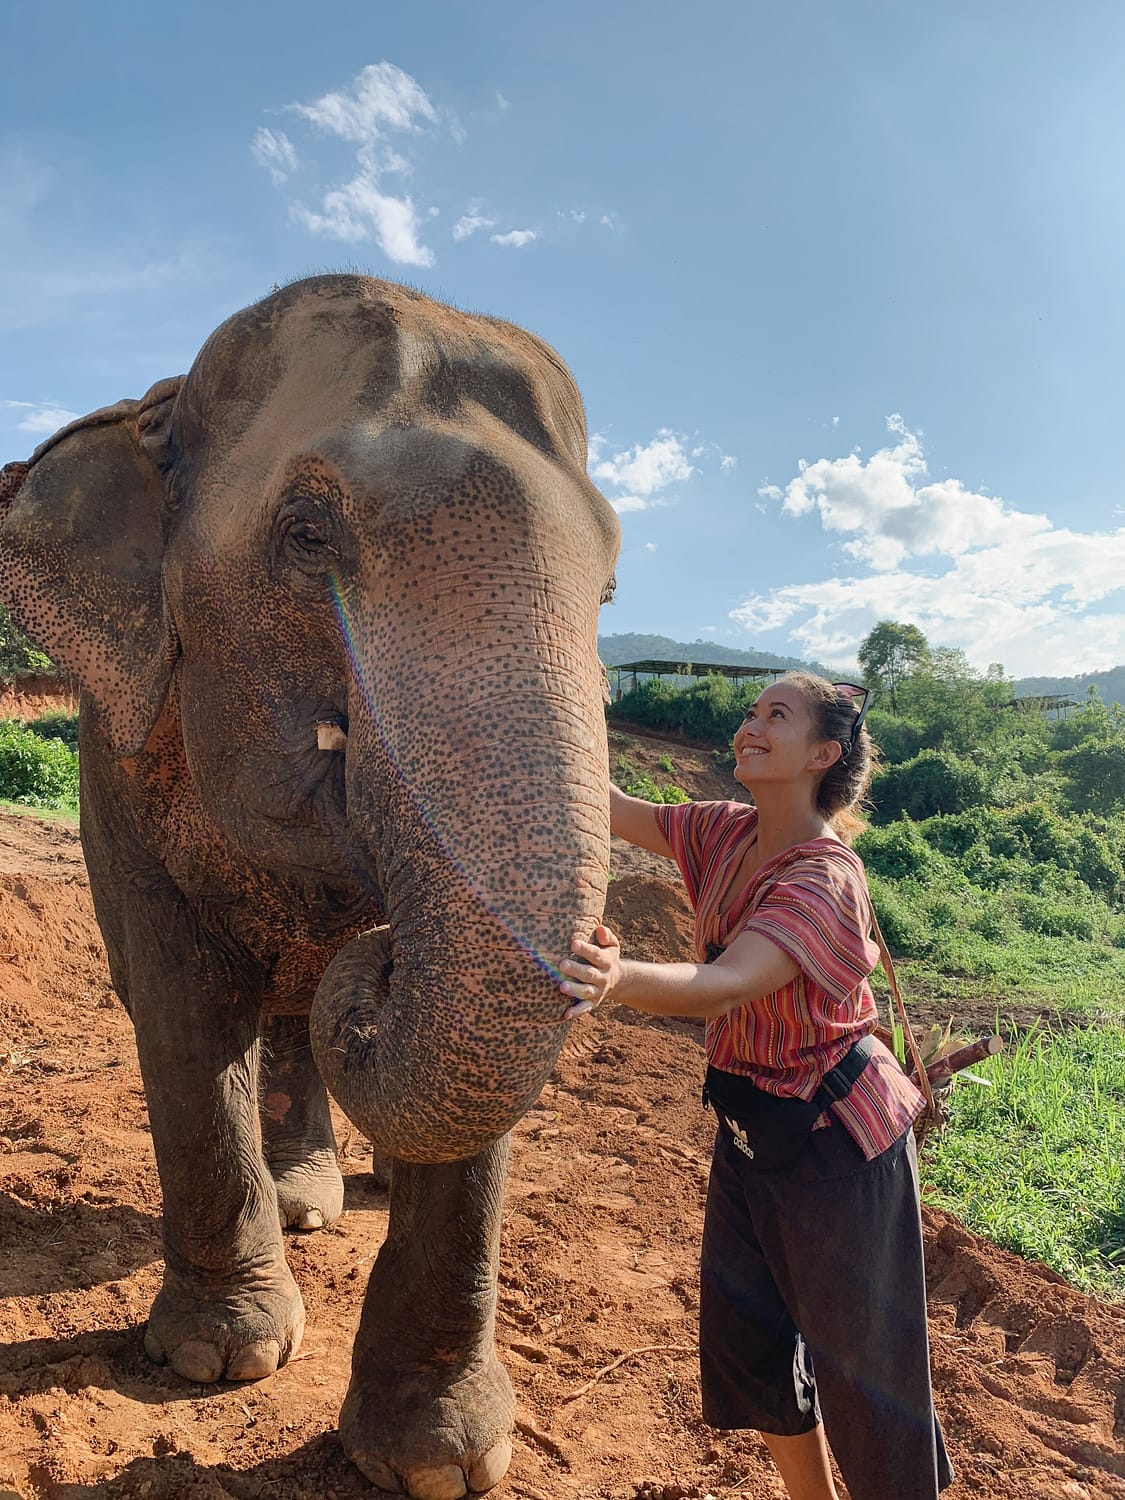 Visiting an ethical elephant sanctuary in Chiang Mai, Thailand